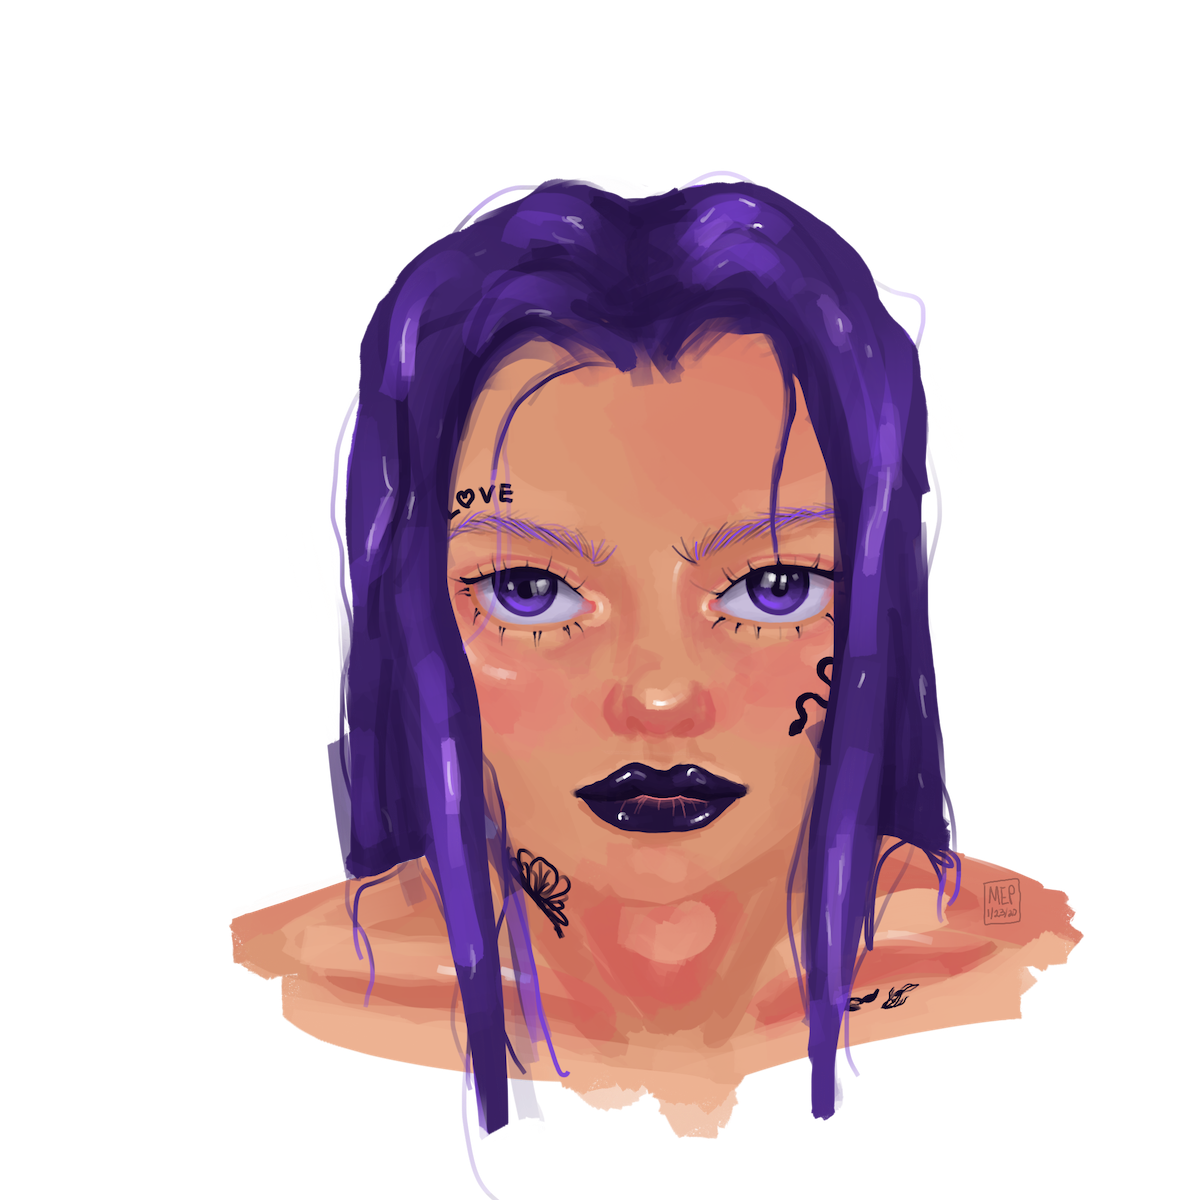 a digital portrait painting of a person with purple hair and eyes.